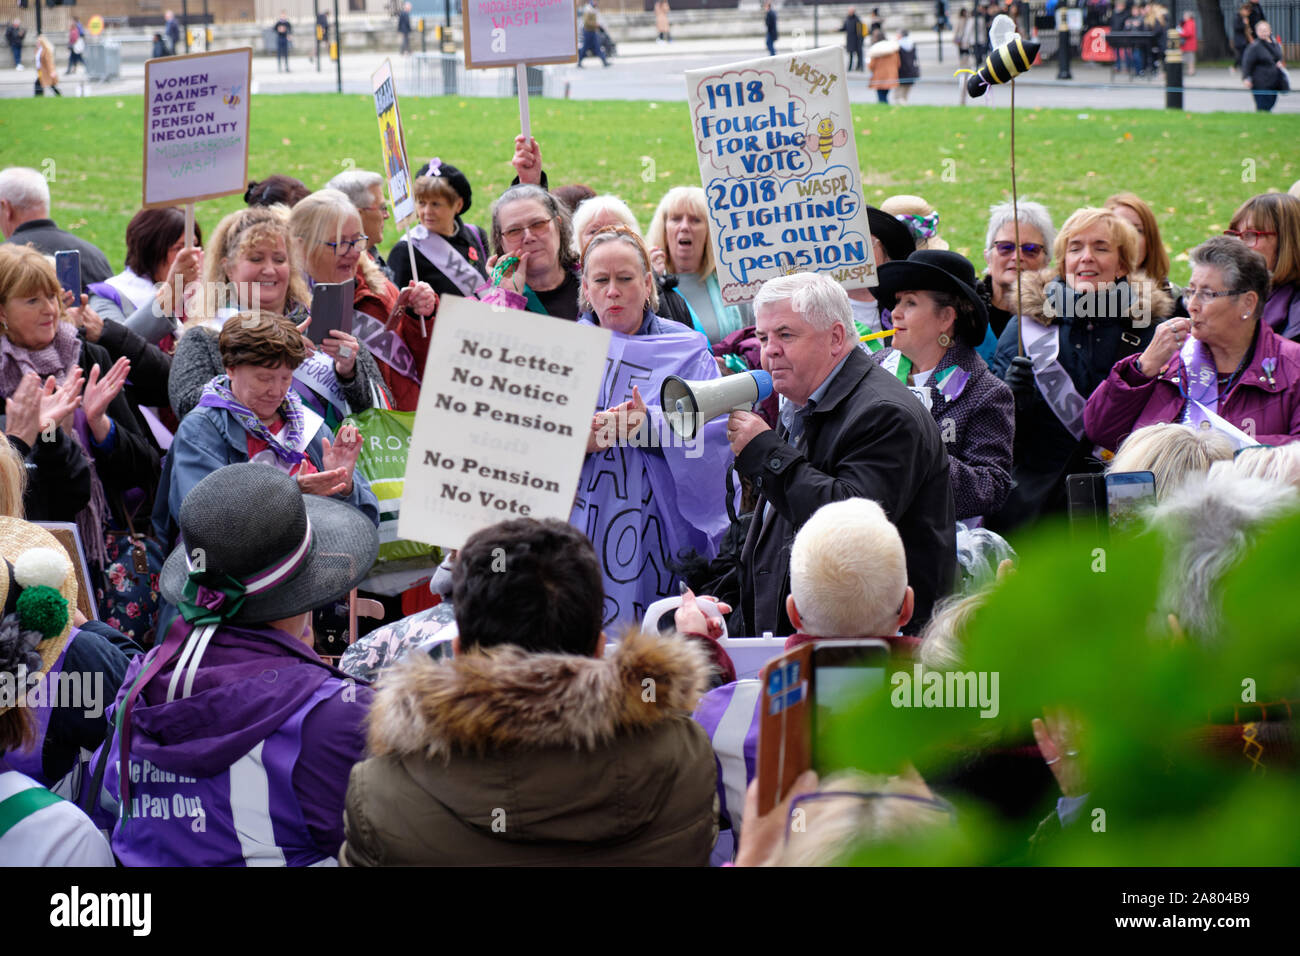 Westminster, London, UK. 5th November 2019.  Hugh Gaffney, Scottish Labour MP for Coatbridge, Chryston and Bellshill addressing crowd at WASPI (Women Against State Pension Injustice) rally in front on Parliament today.  Local women joined by Welsh contingent to ensure that poverty for women born in the 1950s is included in electoral manifesto of the Labour party. . Credit: JF Pelletier / Alamy Live News Stock Photo